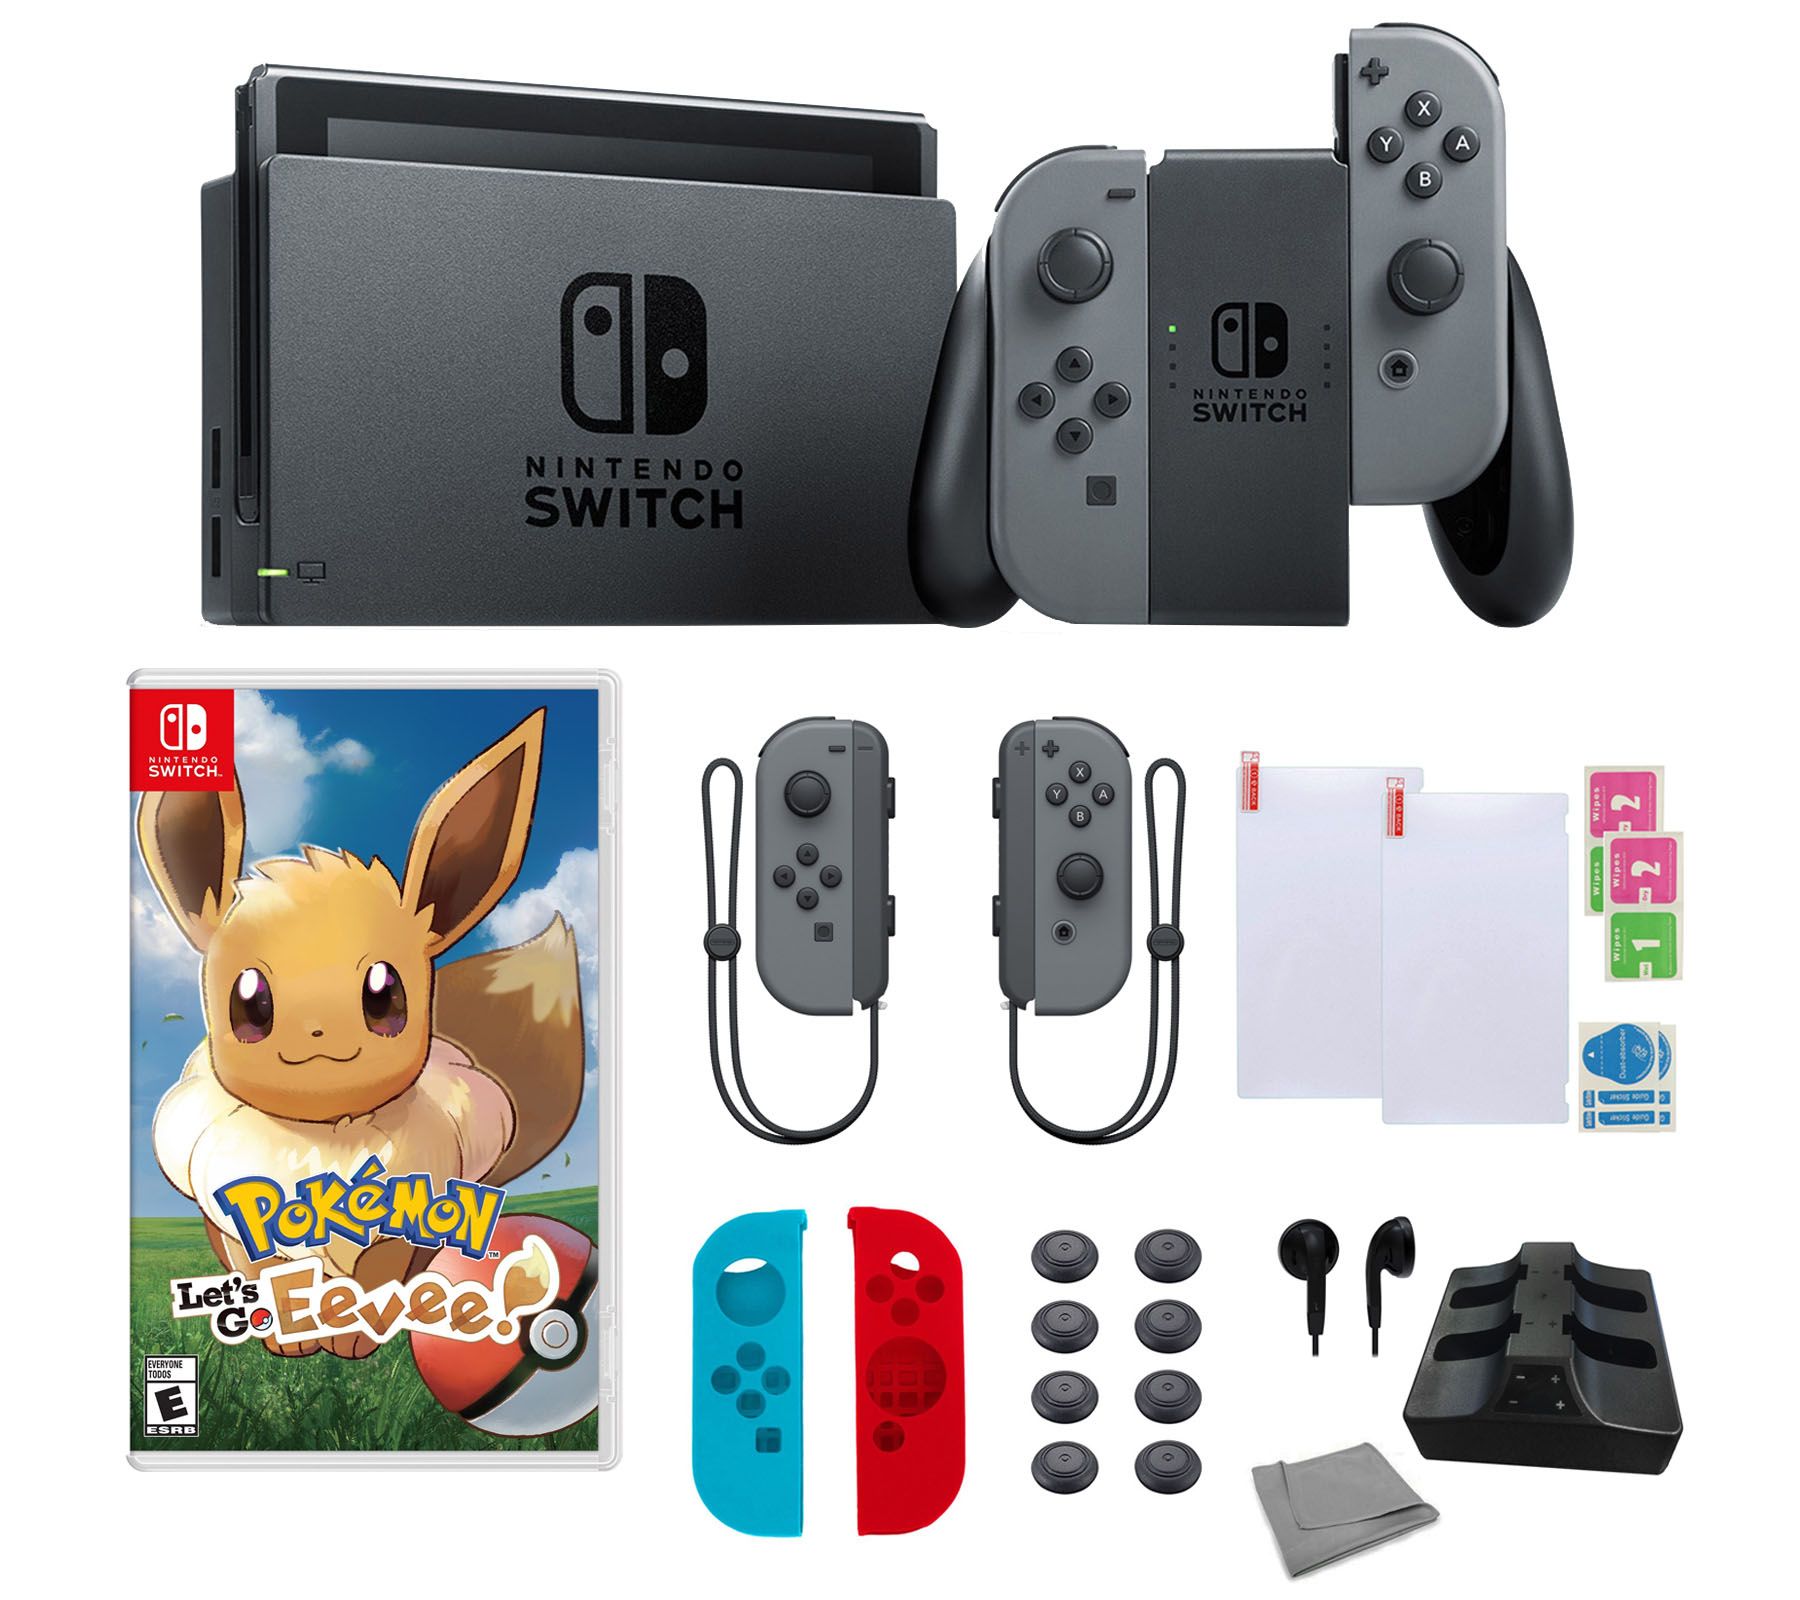 Nintendo Switch OLED Model w/ Neon Red & Neon Blue Joy-Con Console with  Mario Kart 8 Deluxe Game - Limited Bundle - Import with US Plug 